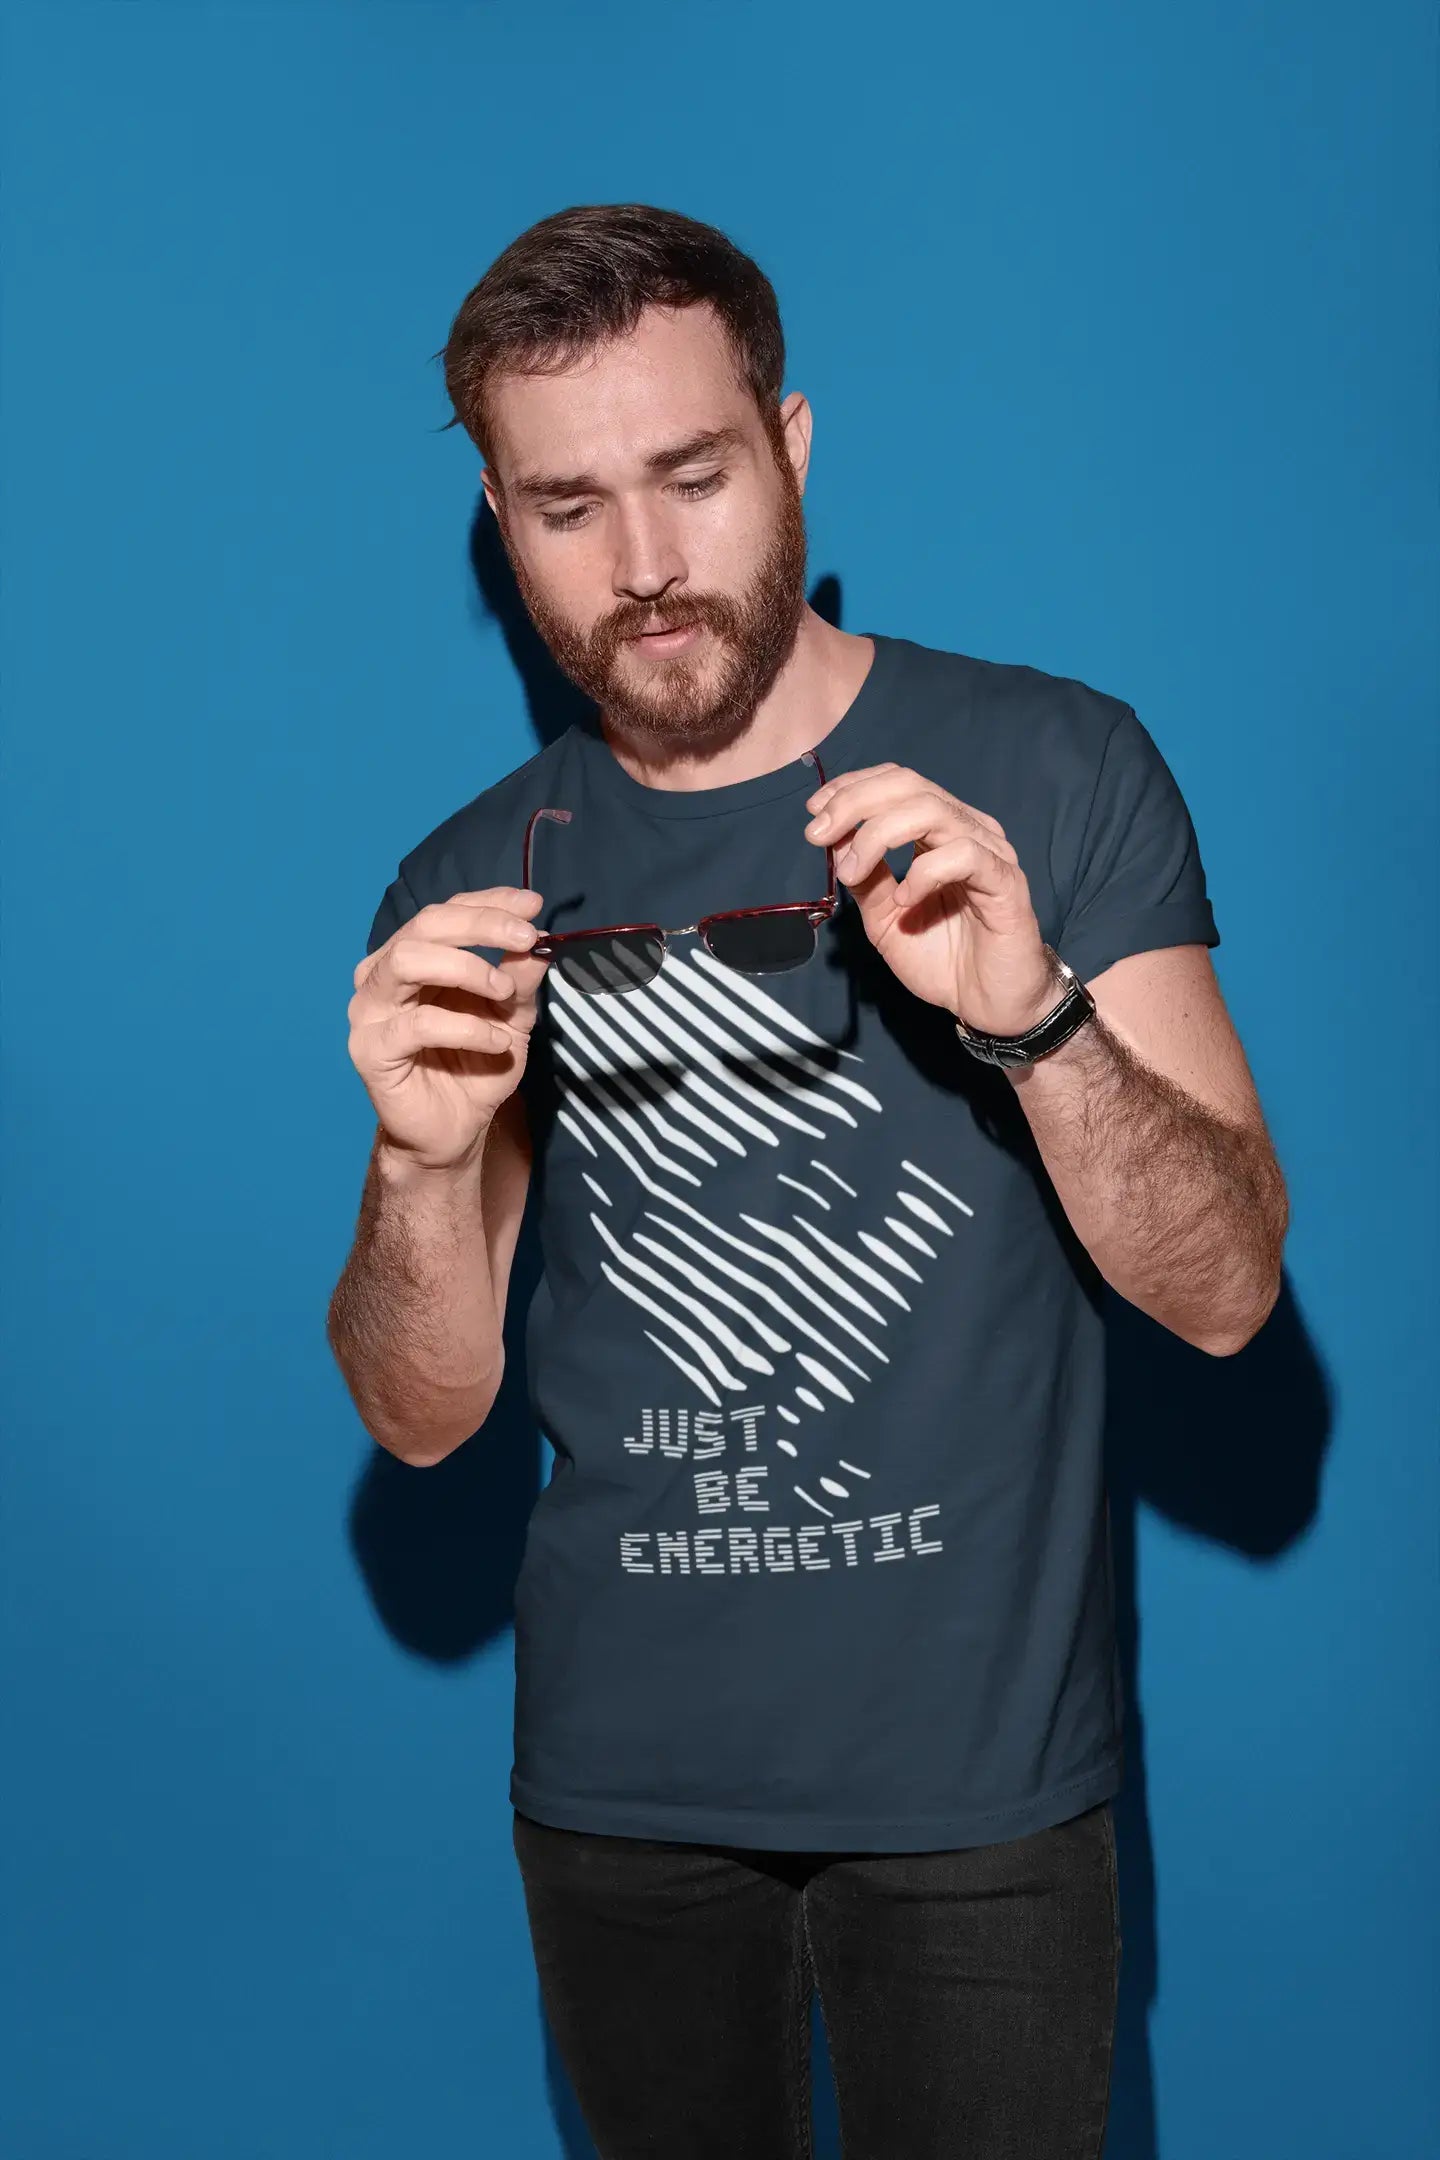 ULTRABASIC - Men's Graphic T-Shirt Just be ENERGETIC